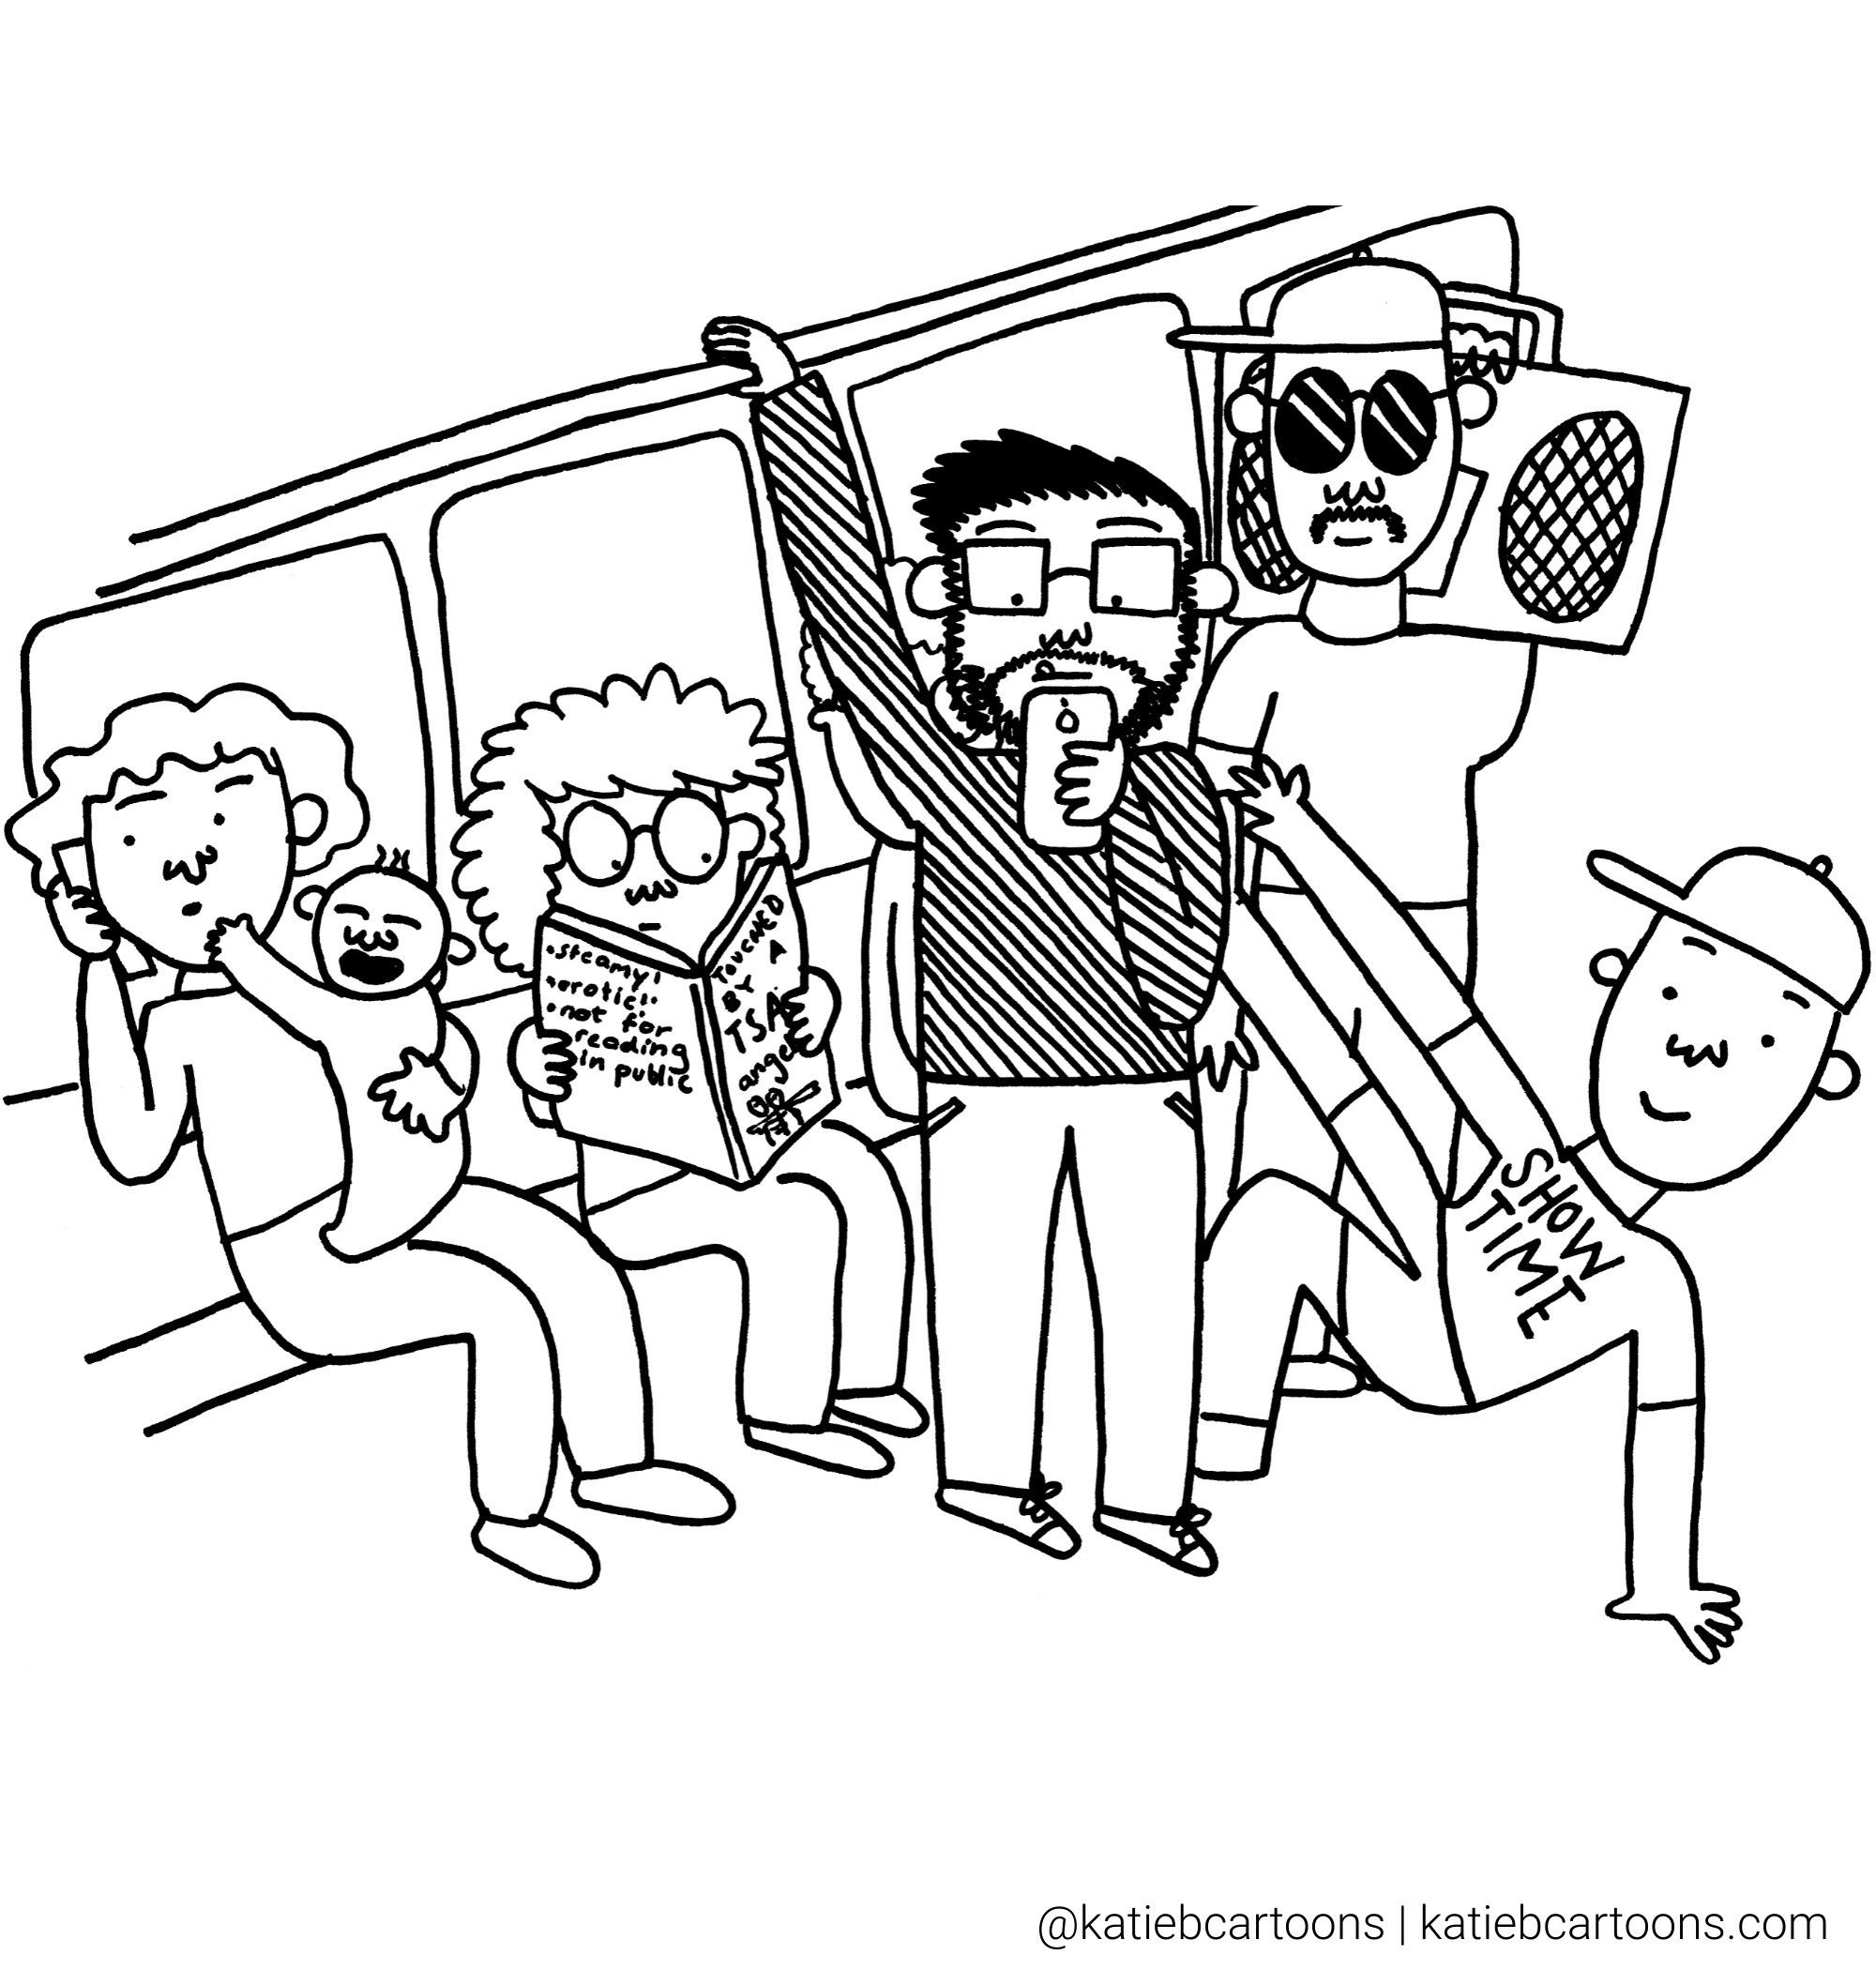 A cartoon of a man standing in crowded subway train looking at his phone.